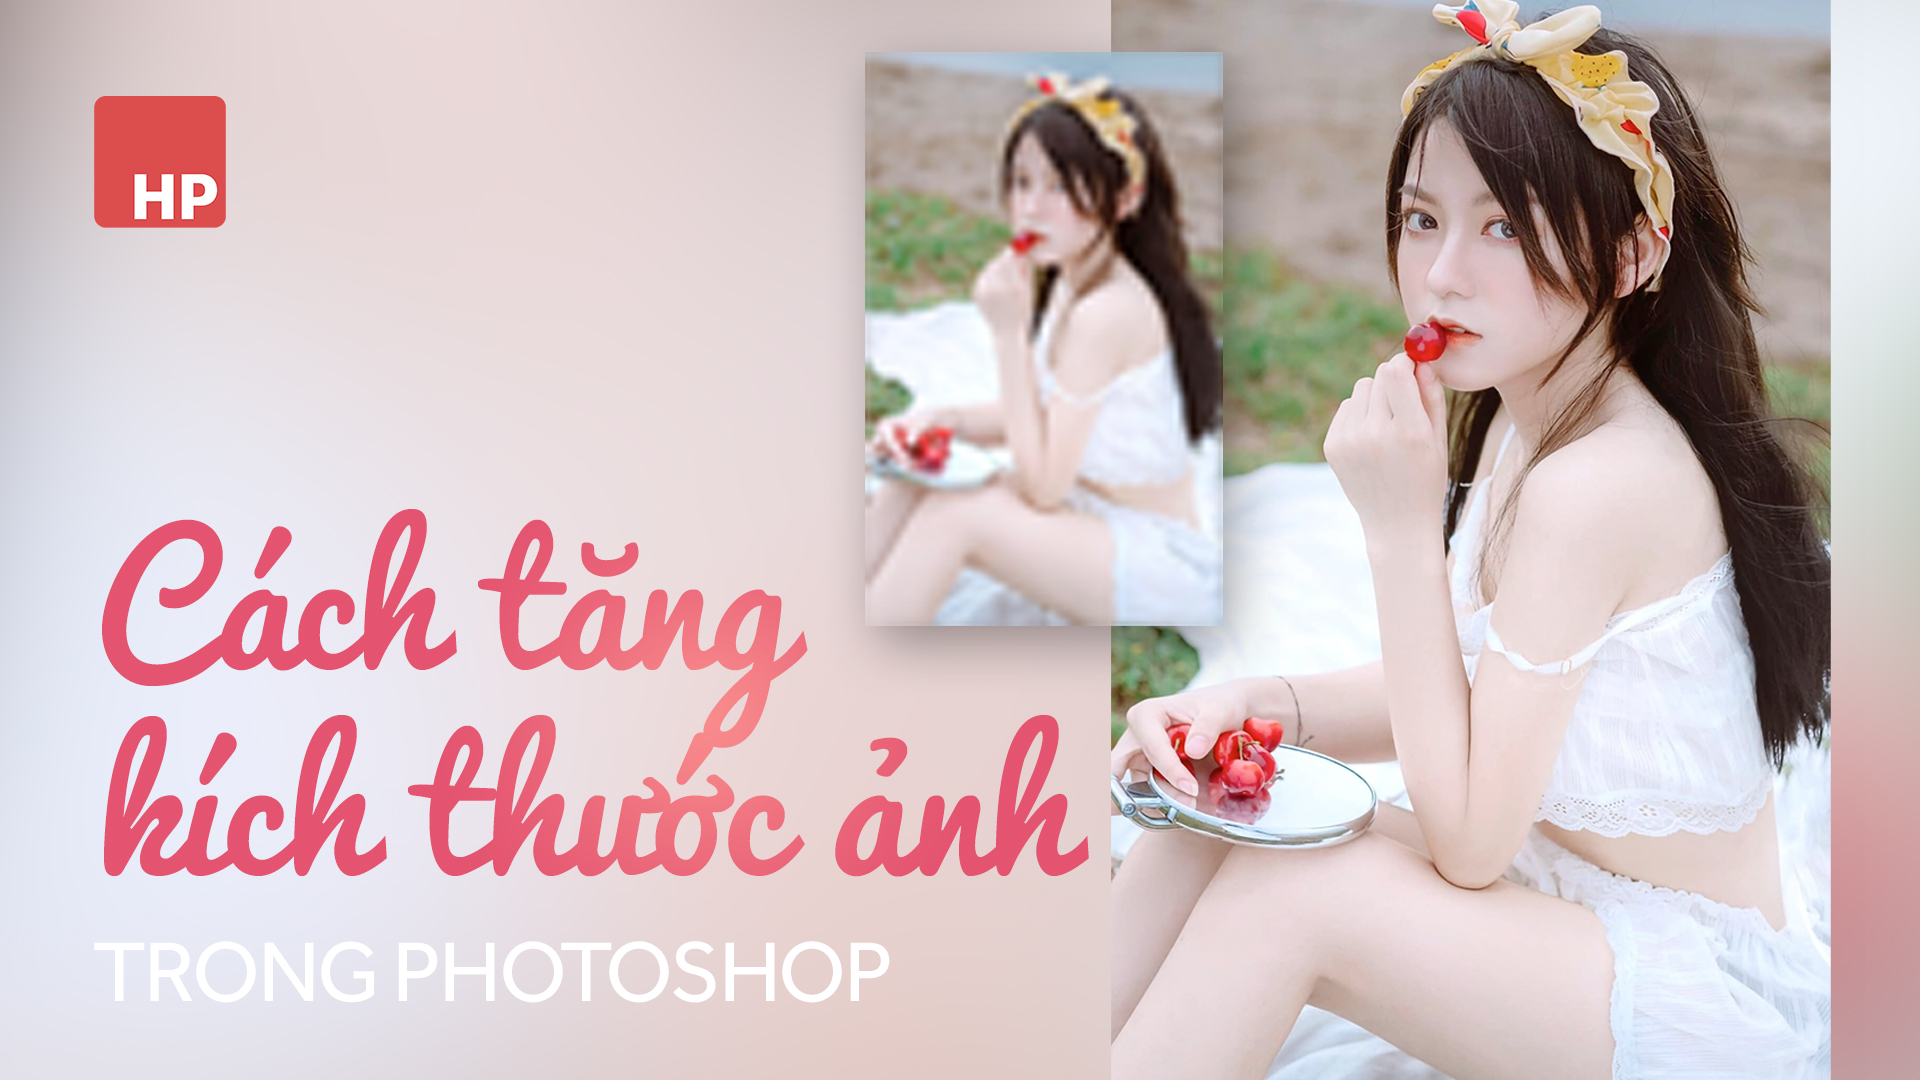 tang kich thuoc anh trong photoshop